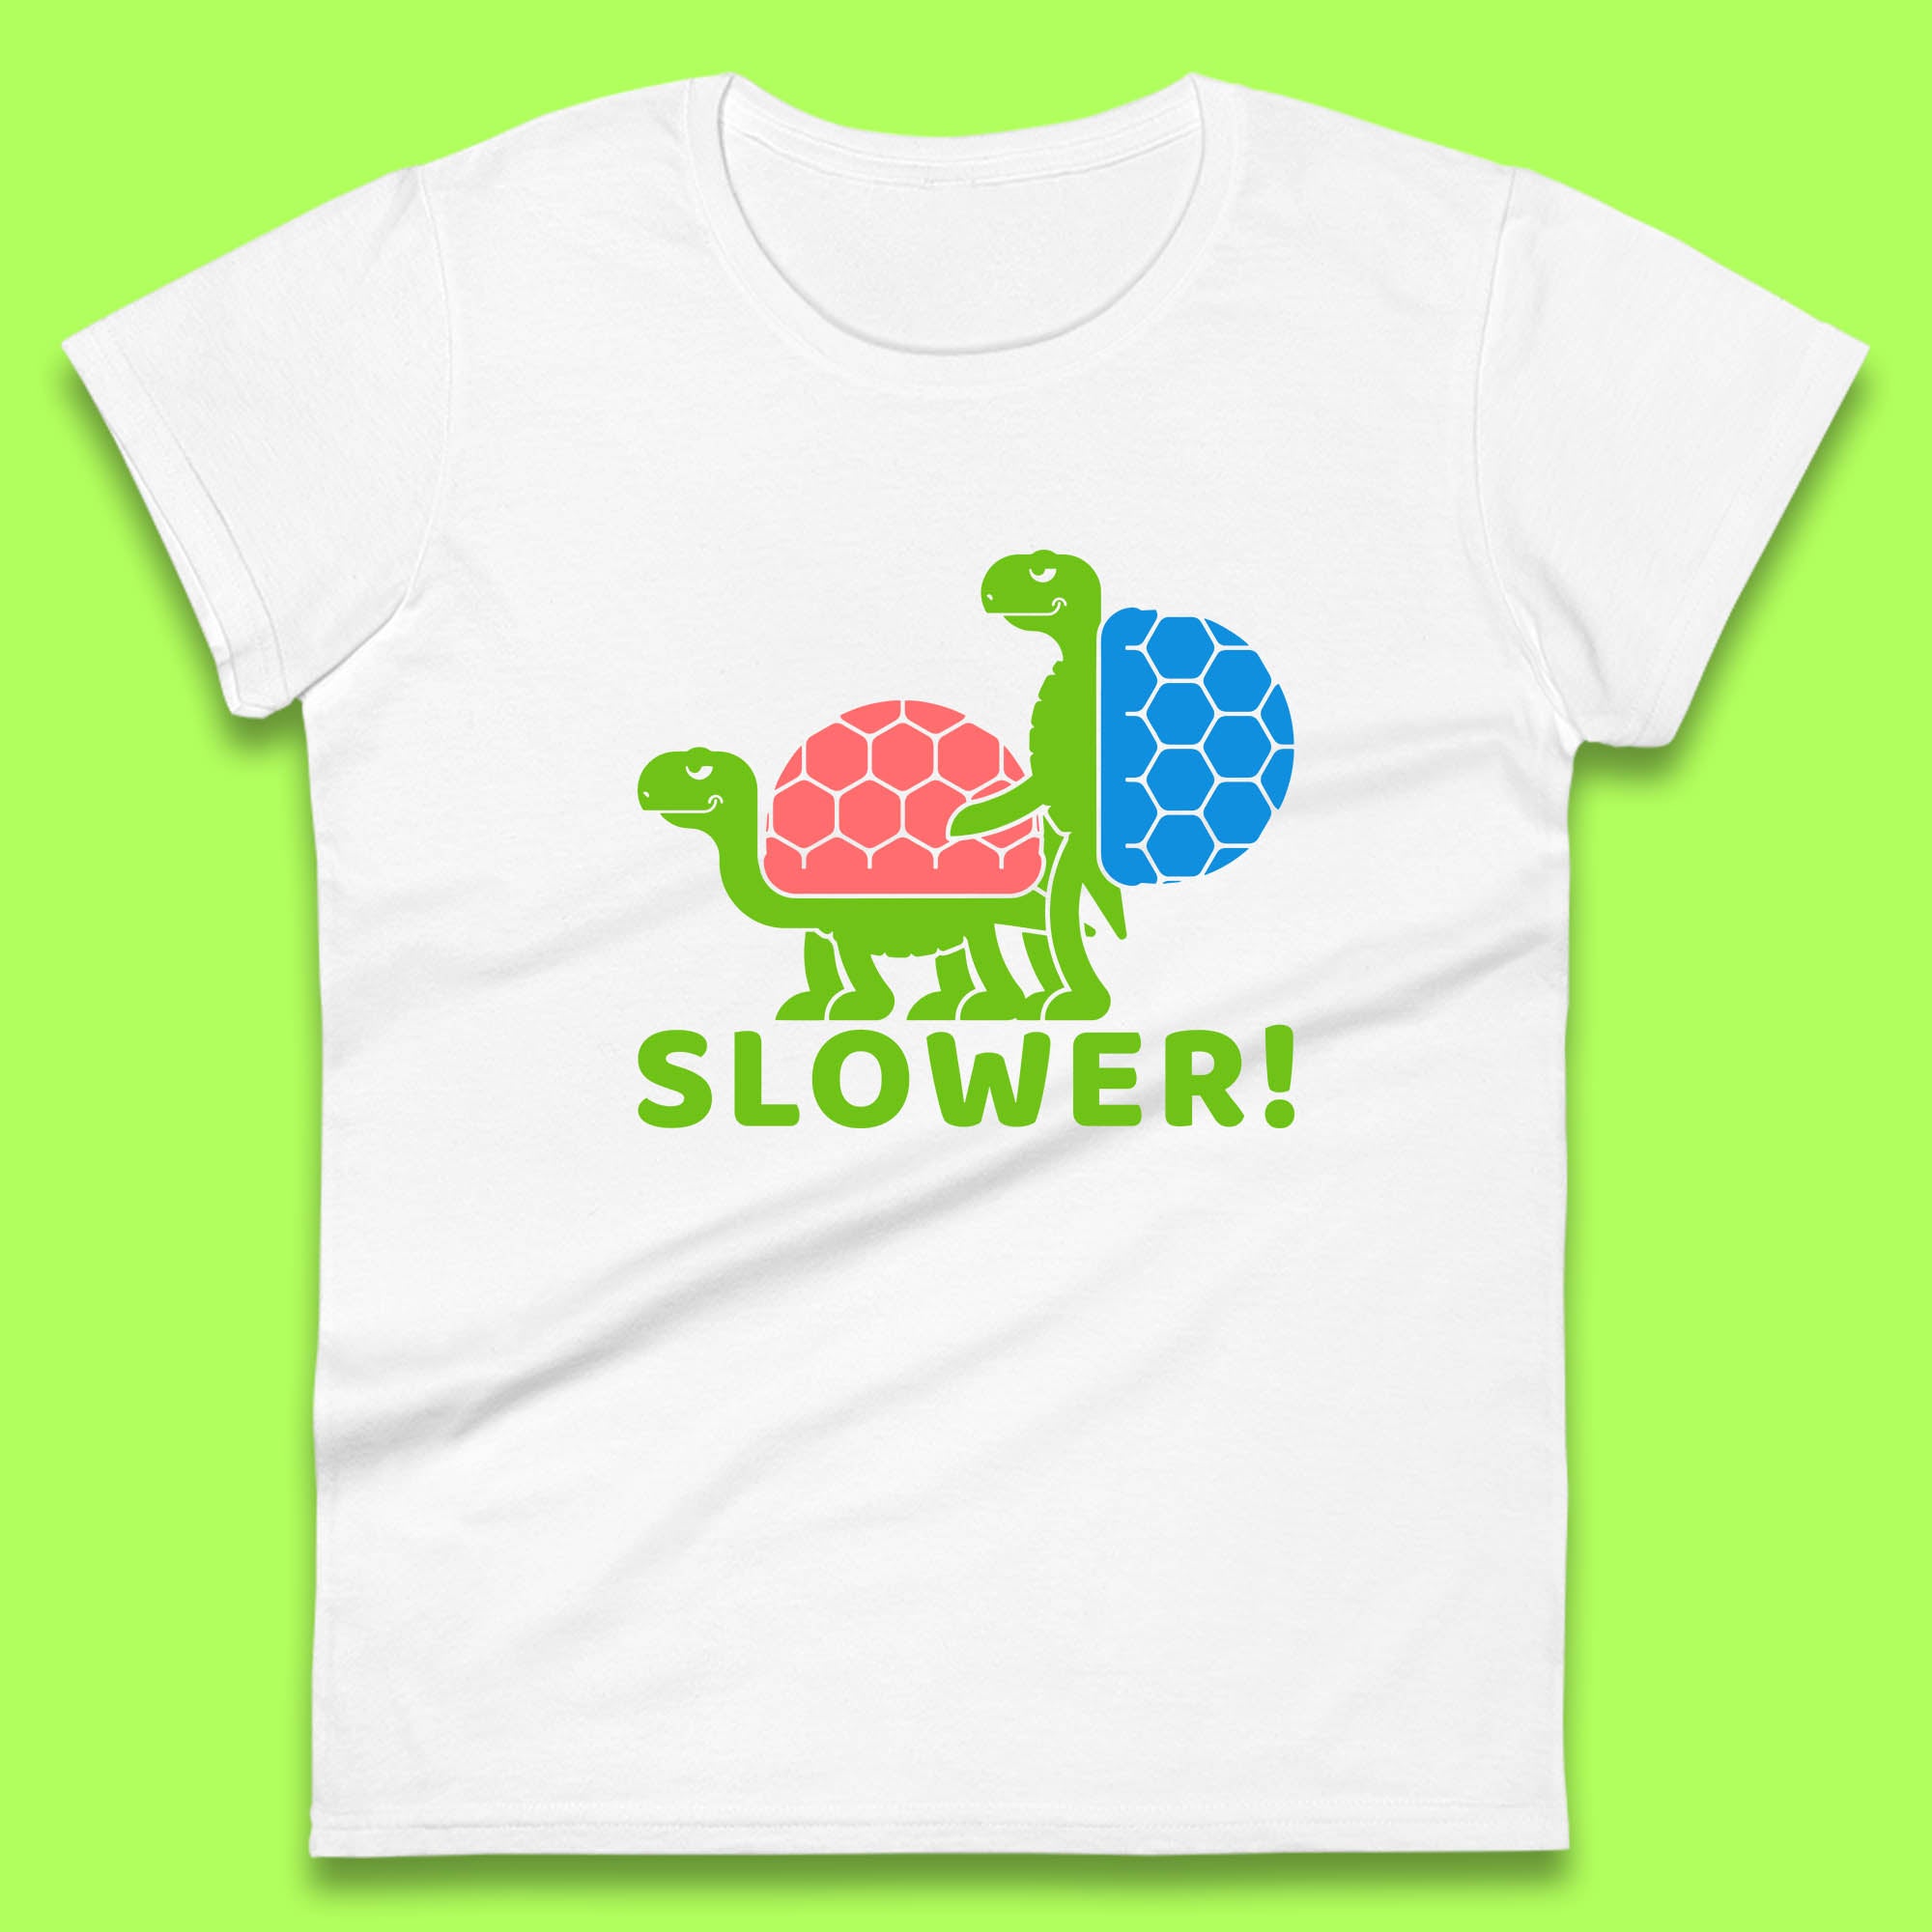 Sea Turtle Sex Tortoise Intercourse Animal Reproduction Funny Slower Offensive Ocean Life Lover Womens Tee Top